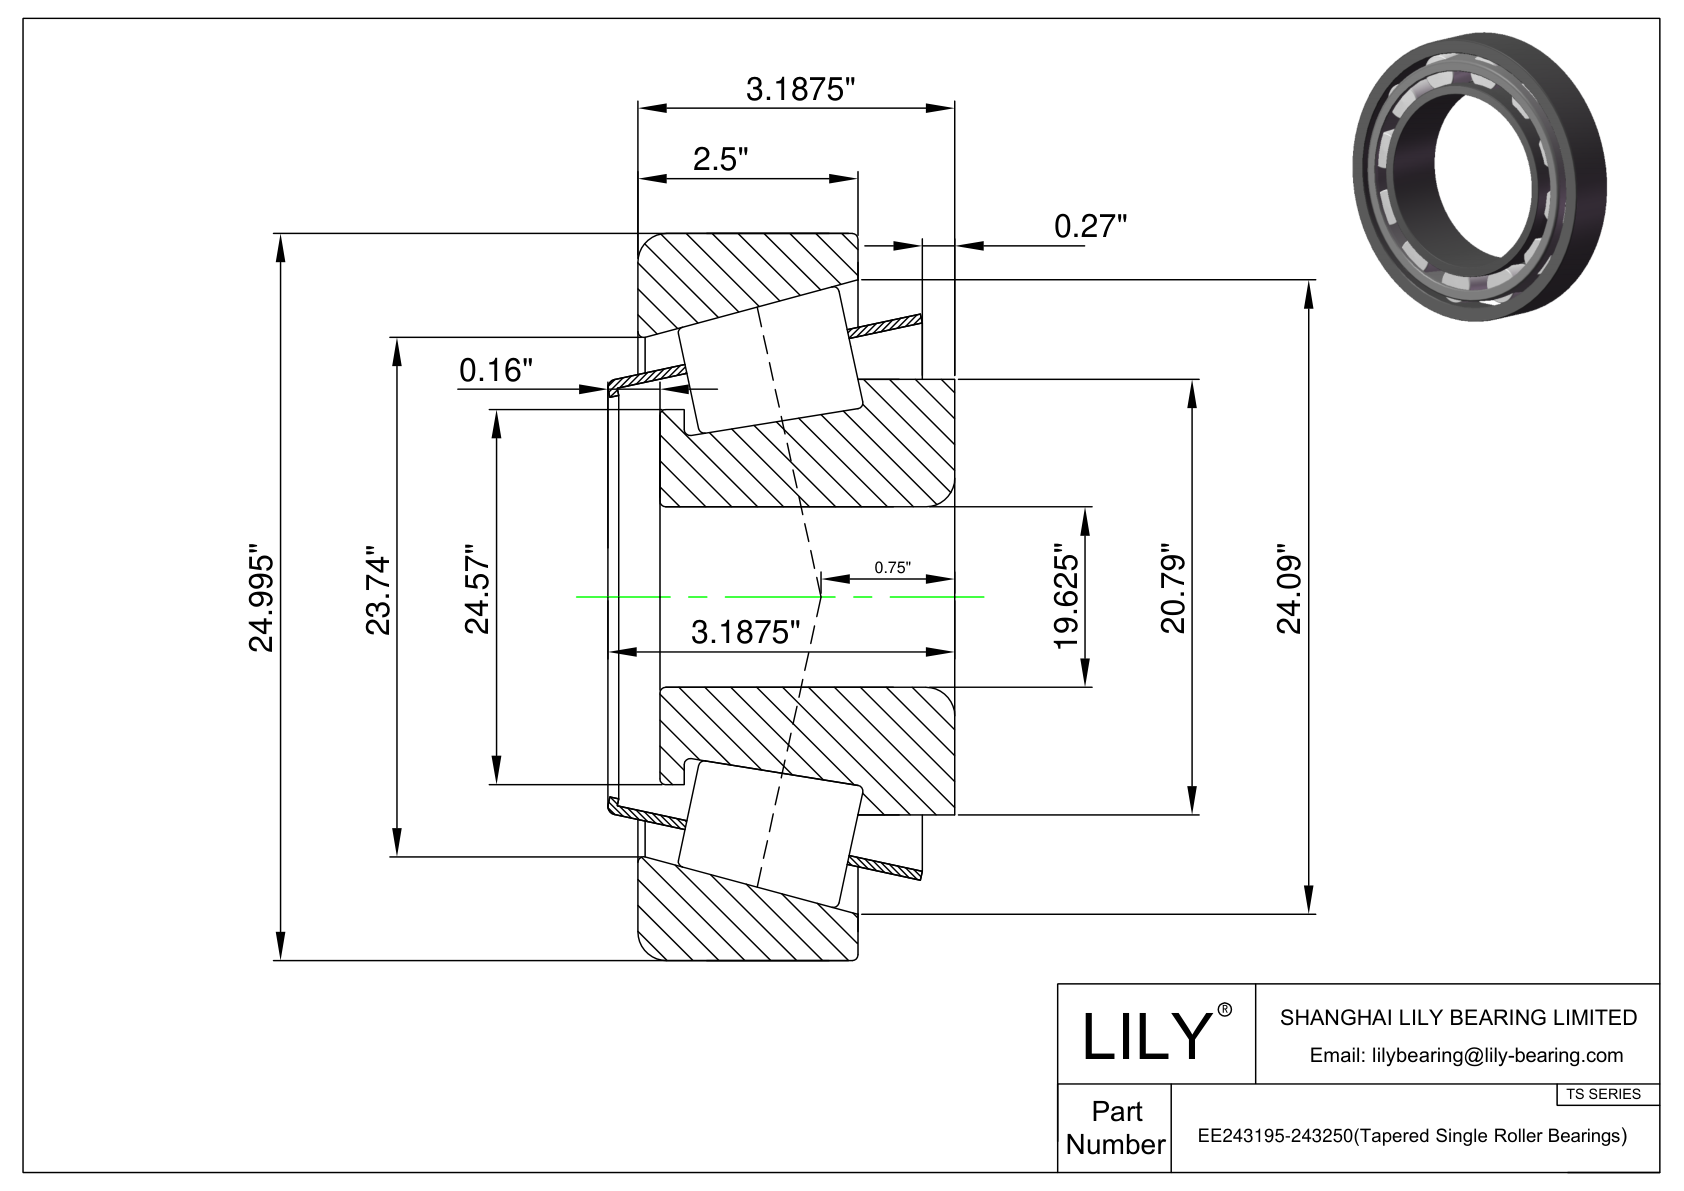 EE243195-243250 TS (Tapered Single Roller Bearings) (Imperial) cad drawing